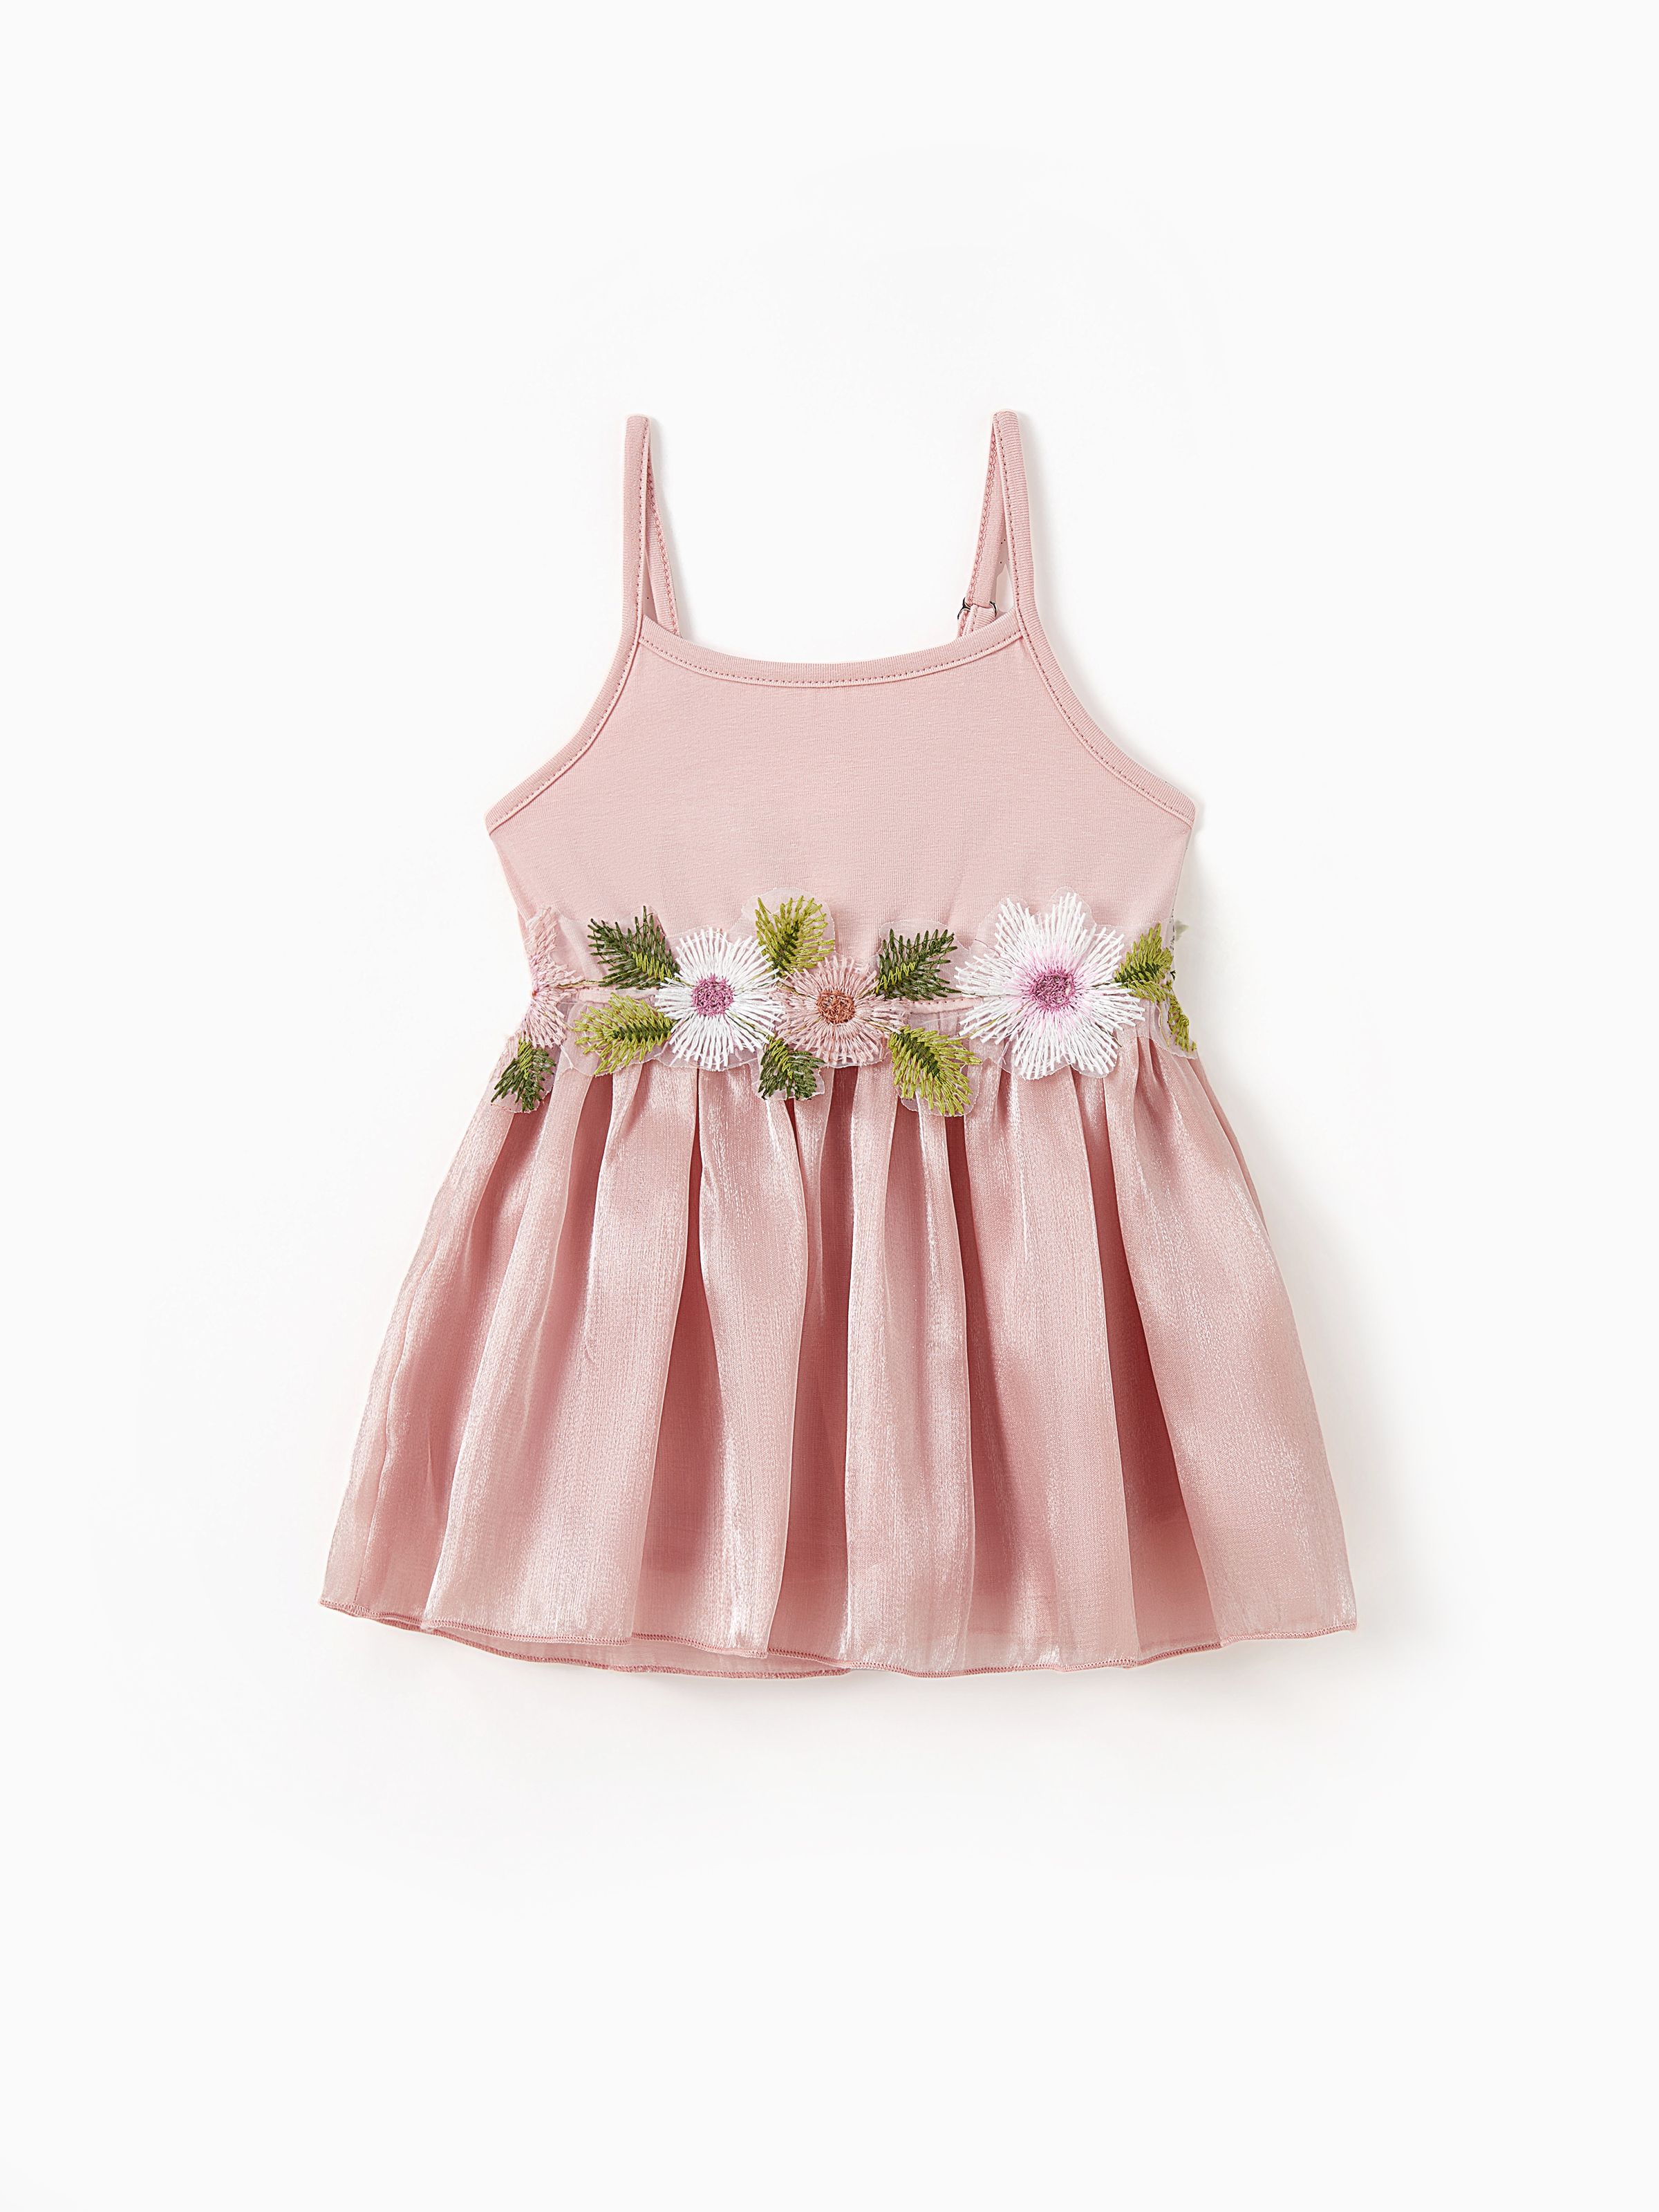 

Mommy and Me Sweet Style Flower Embroidered Sleeveless Pleated Tulle Strap Dresses